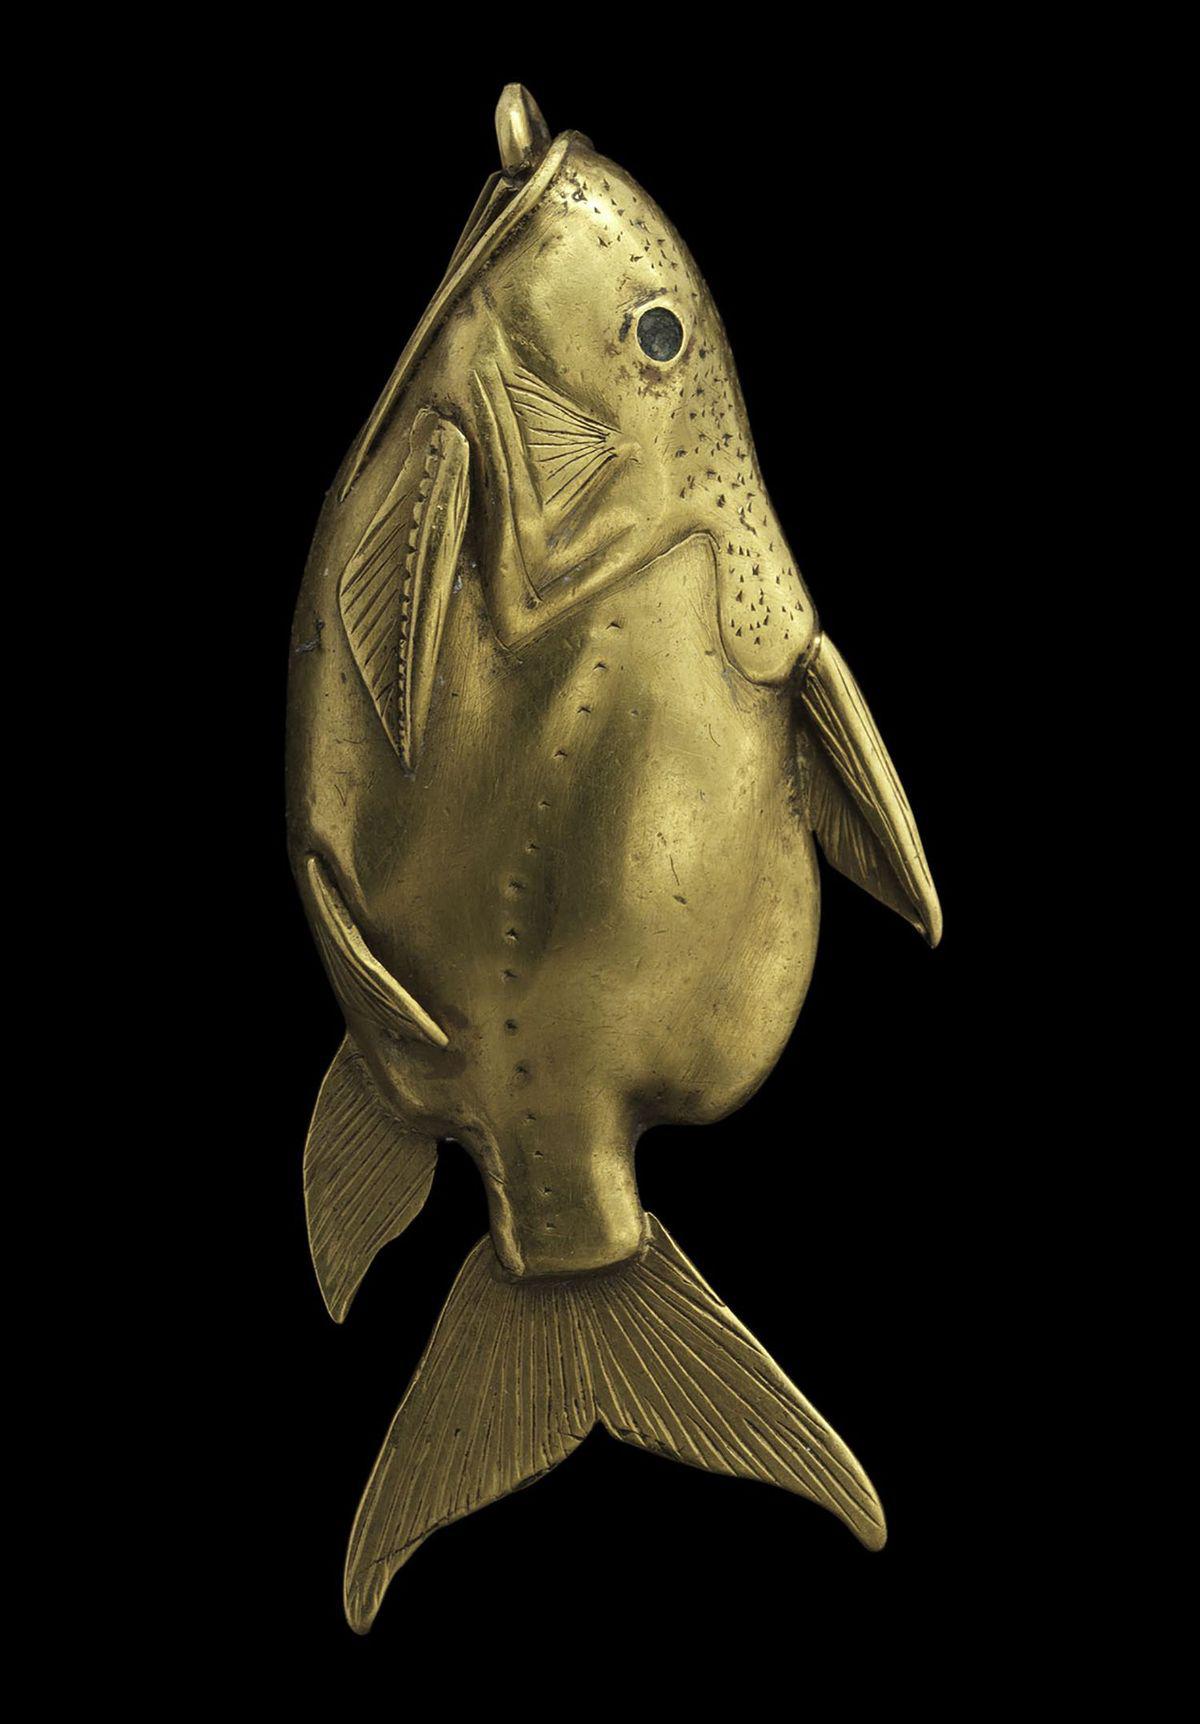 An ancient egyptian gold pendant (ca. 1878-1749 BC) in the form of an upside-down catfish, a species that regularly swims belly-up and thus resembles a dead fish. The fish was a popular charm in ancient Egypt believed to ward off drowning.jpg